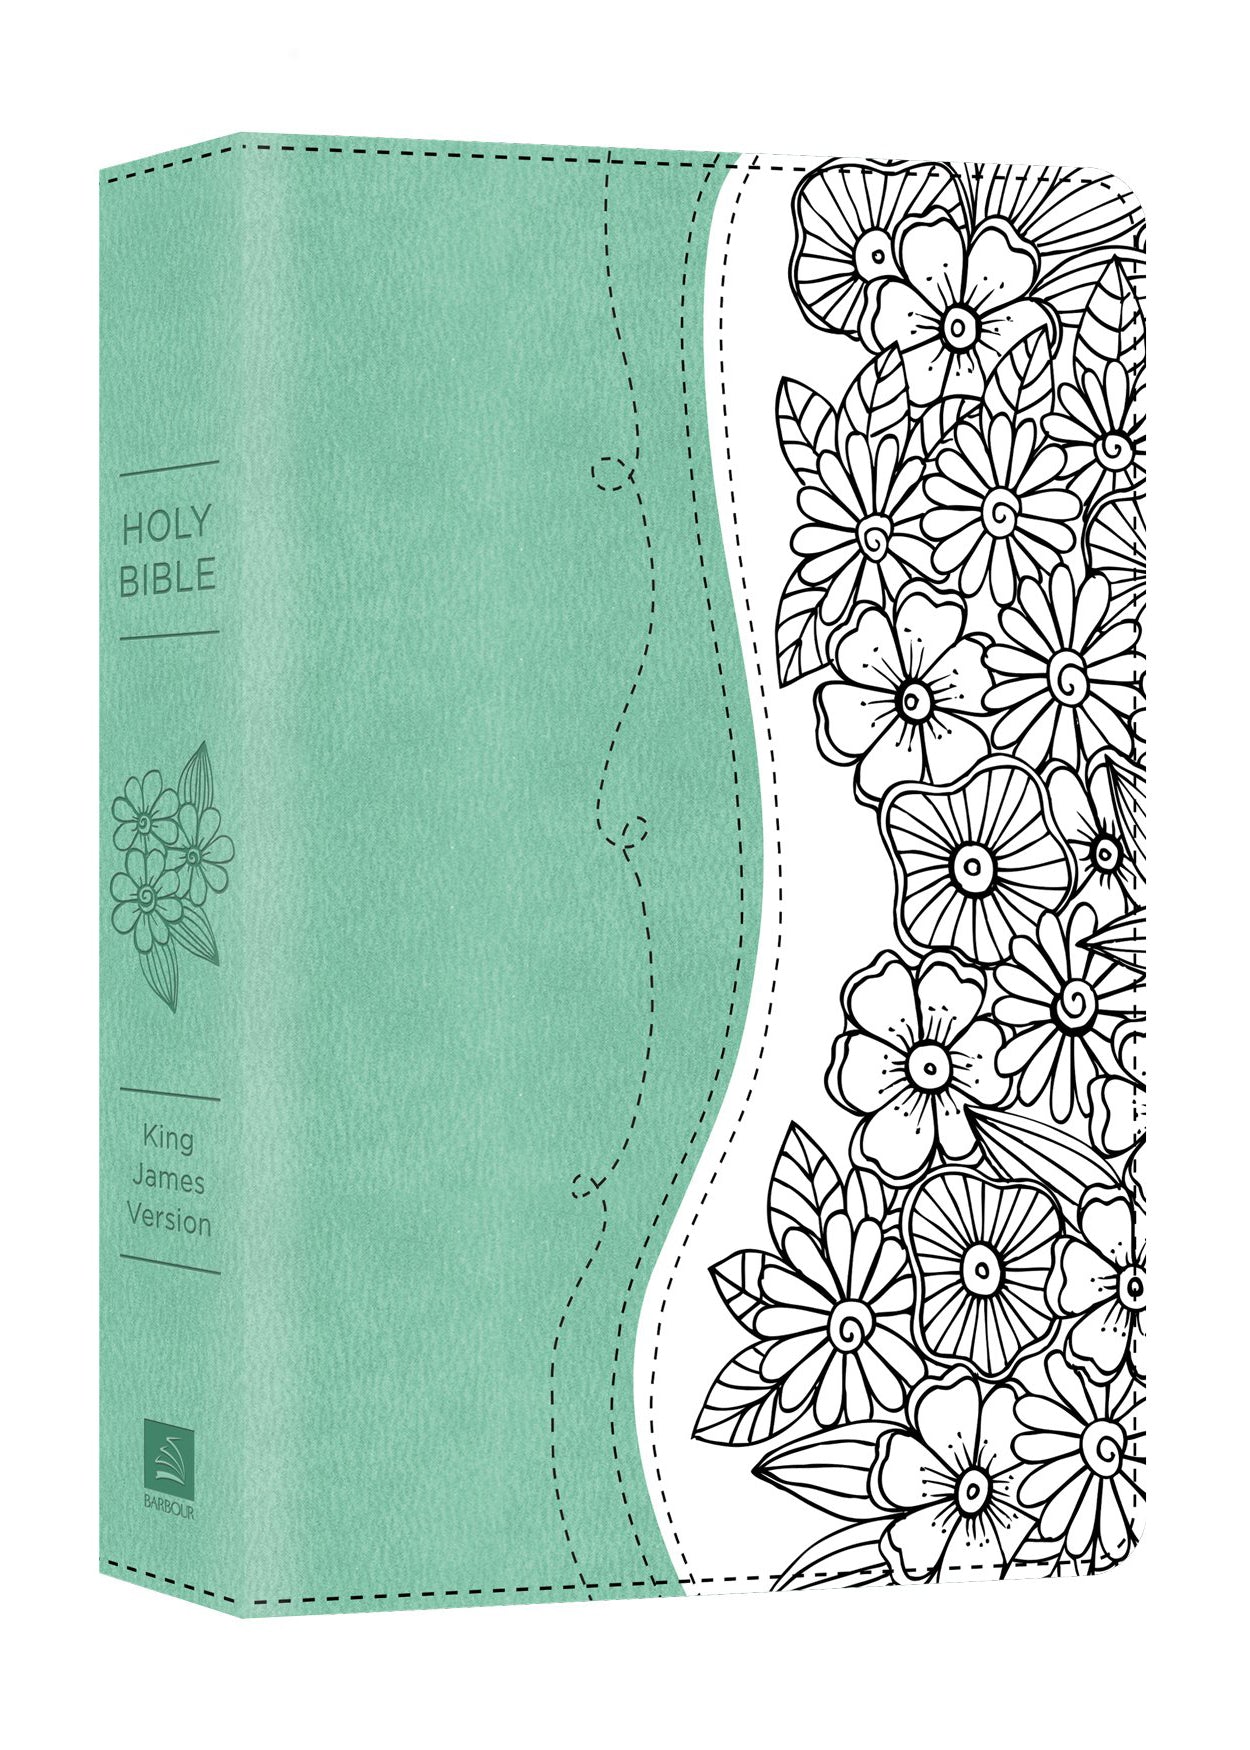 KJV Teal and White Personal Reflections Home & Lifestyle